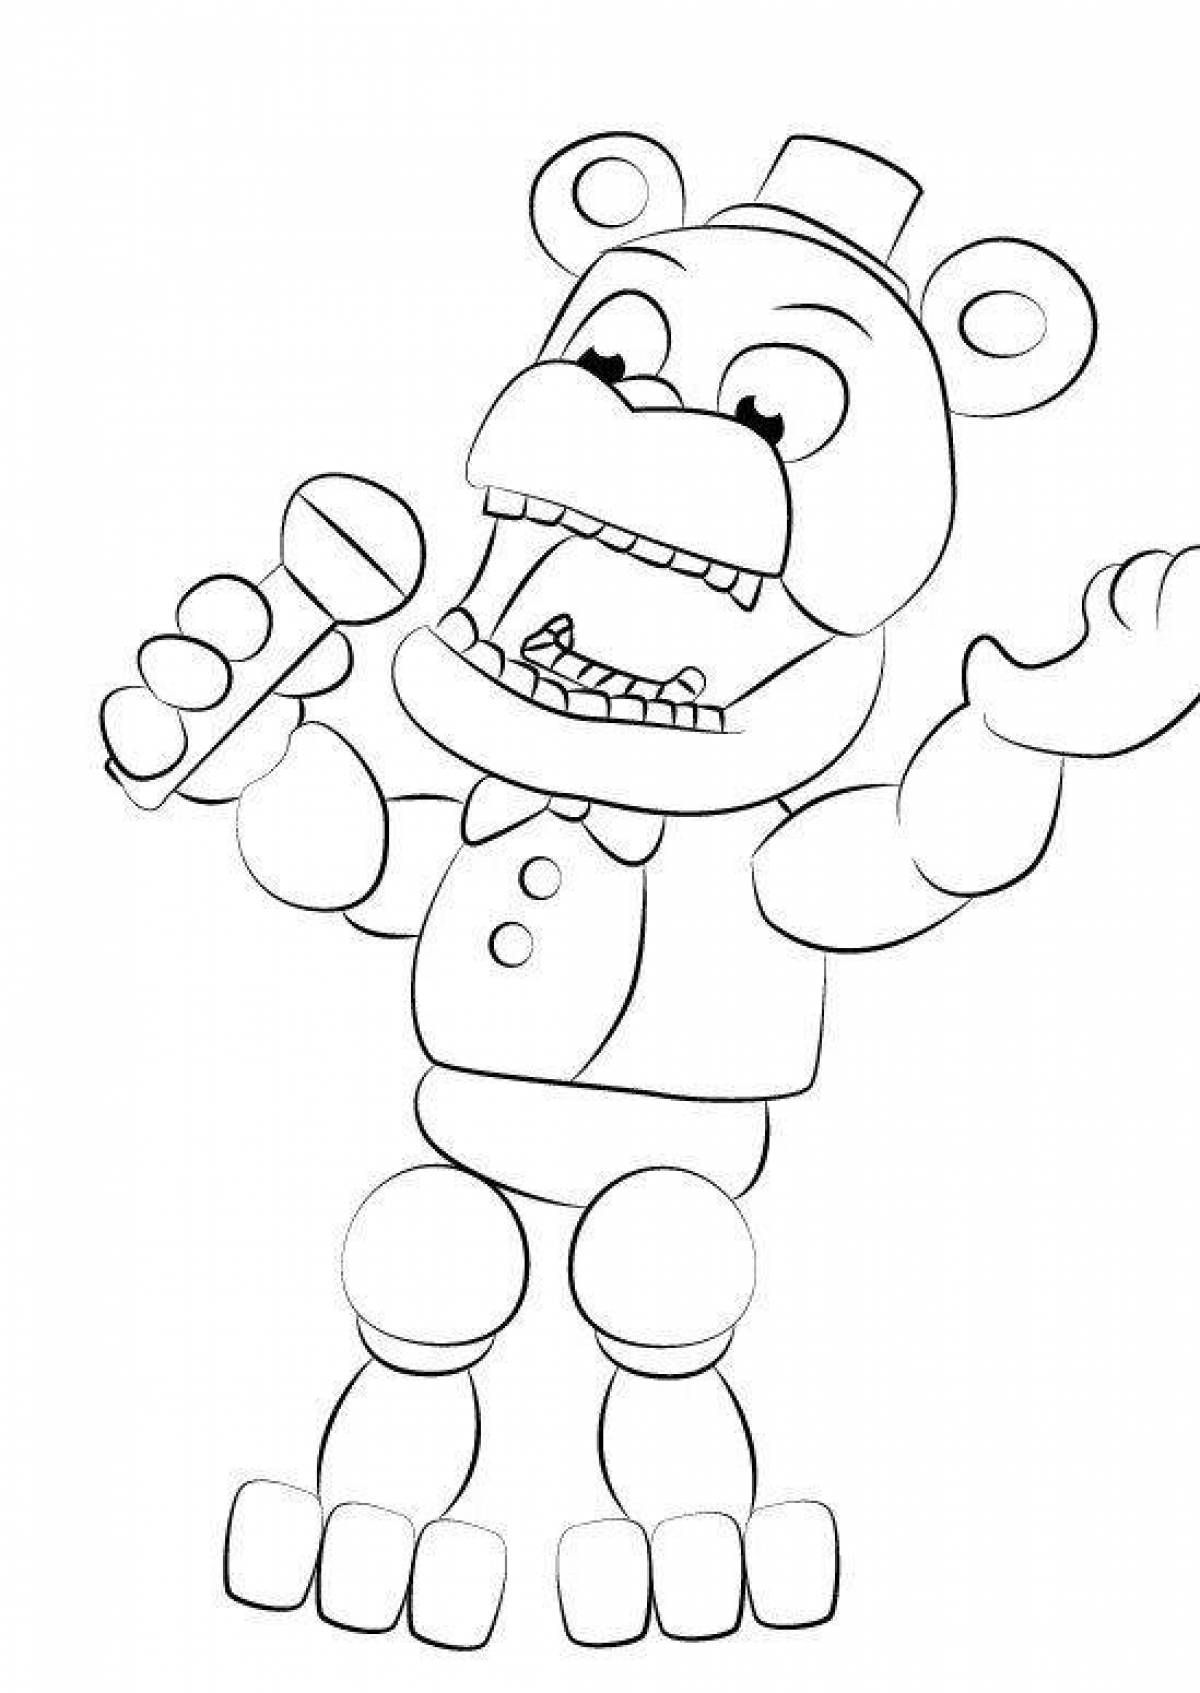 Gorgeous fnaf world coloring page